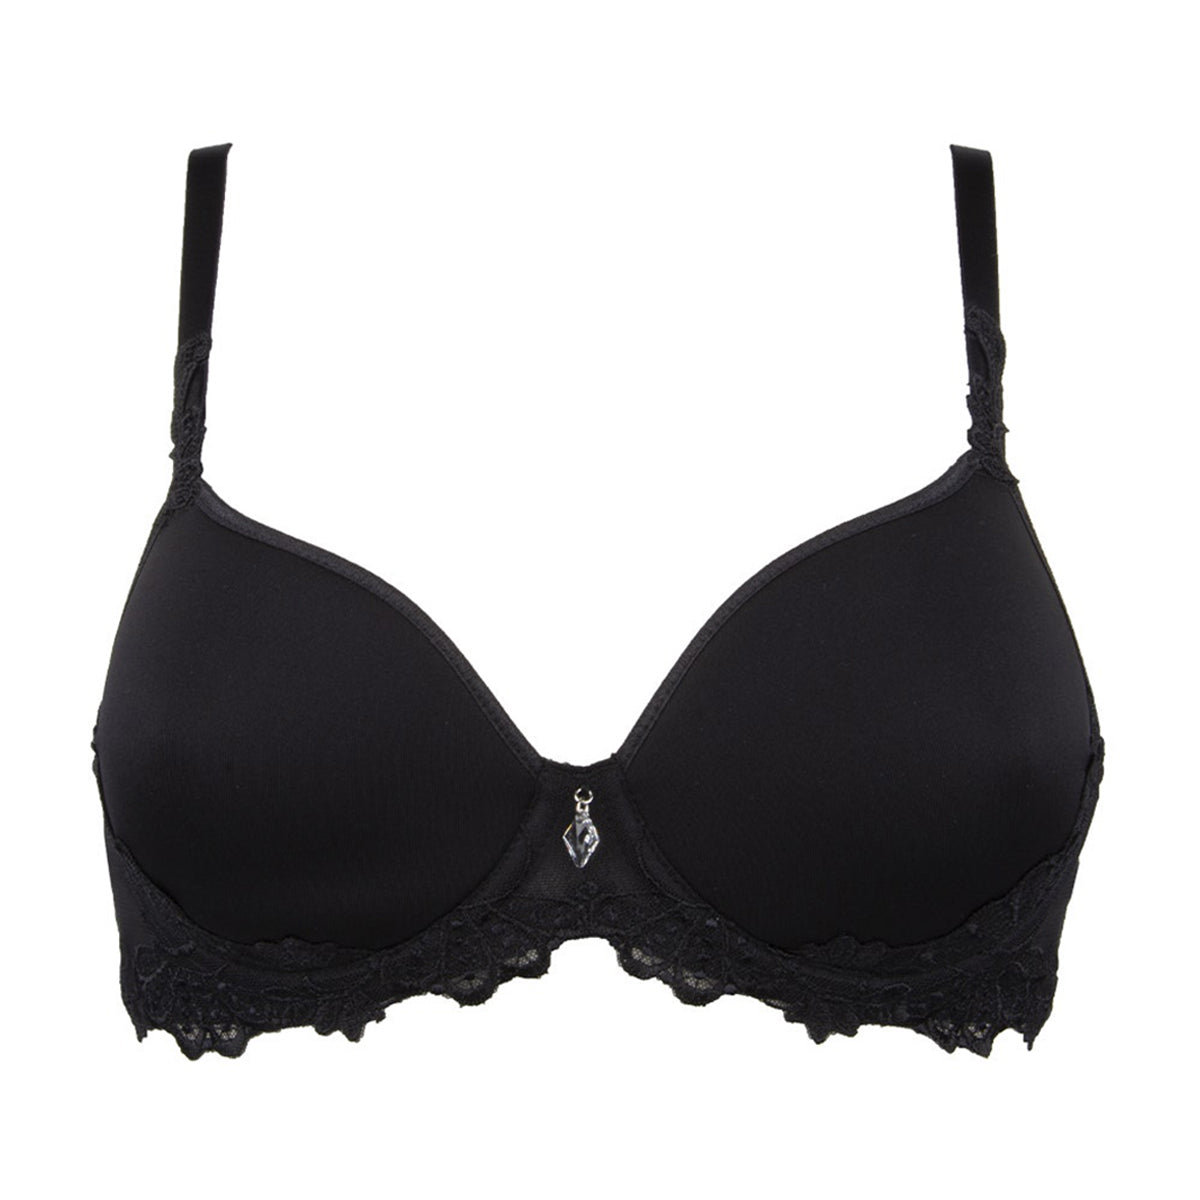 Lise Charmel Push Up Bras up to 60% Off Retail